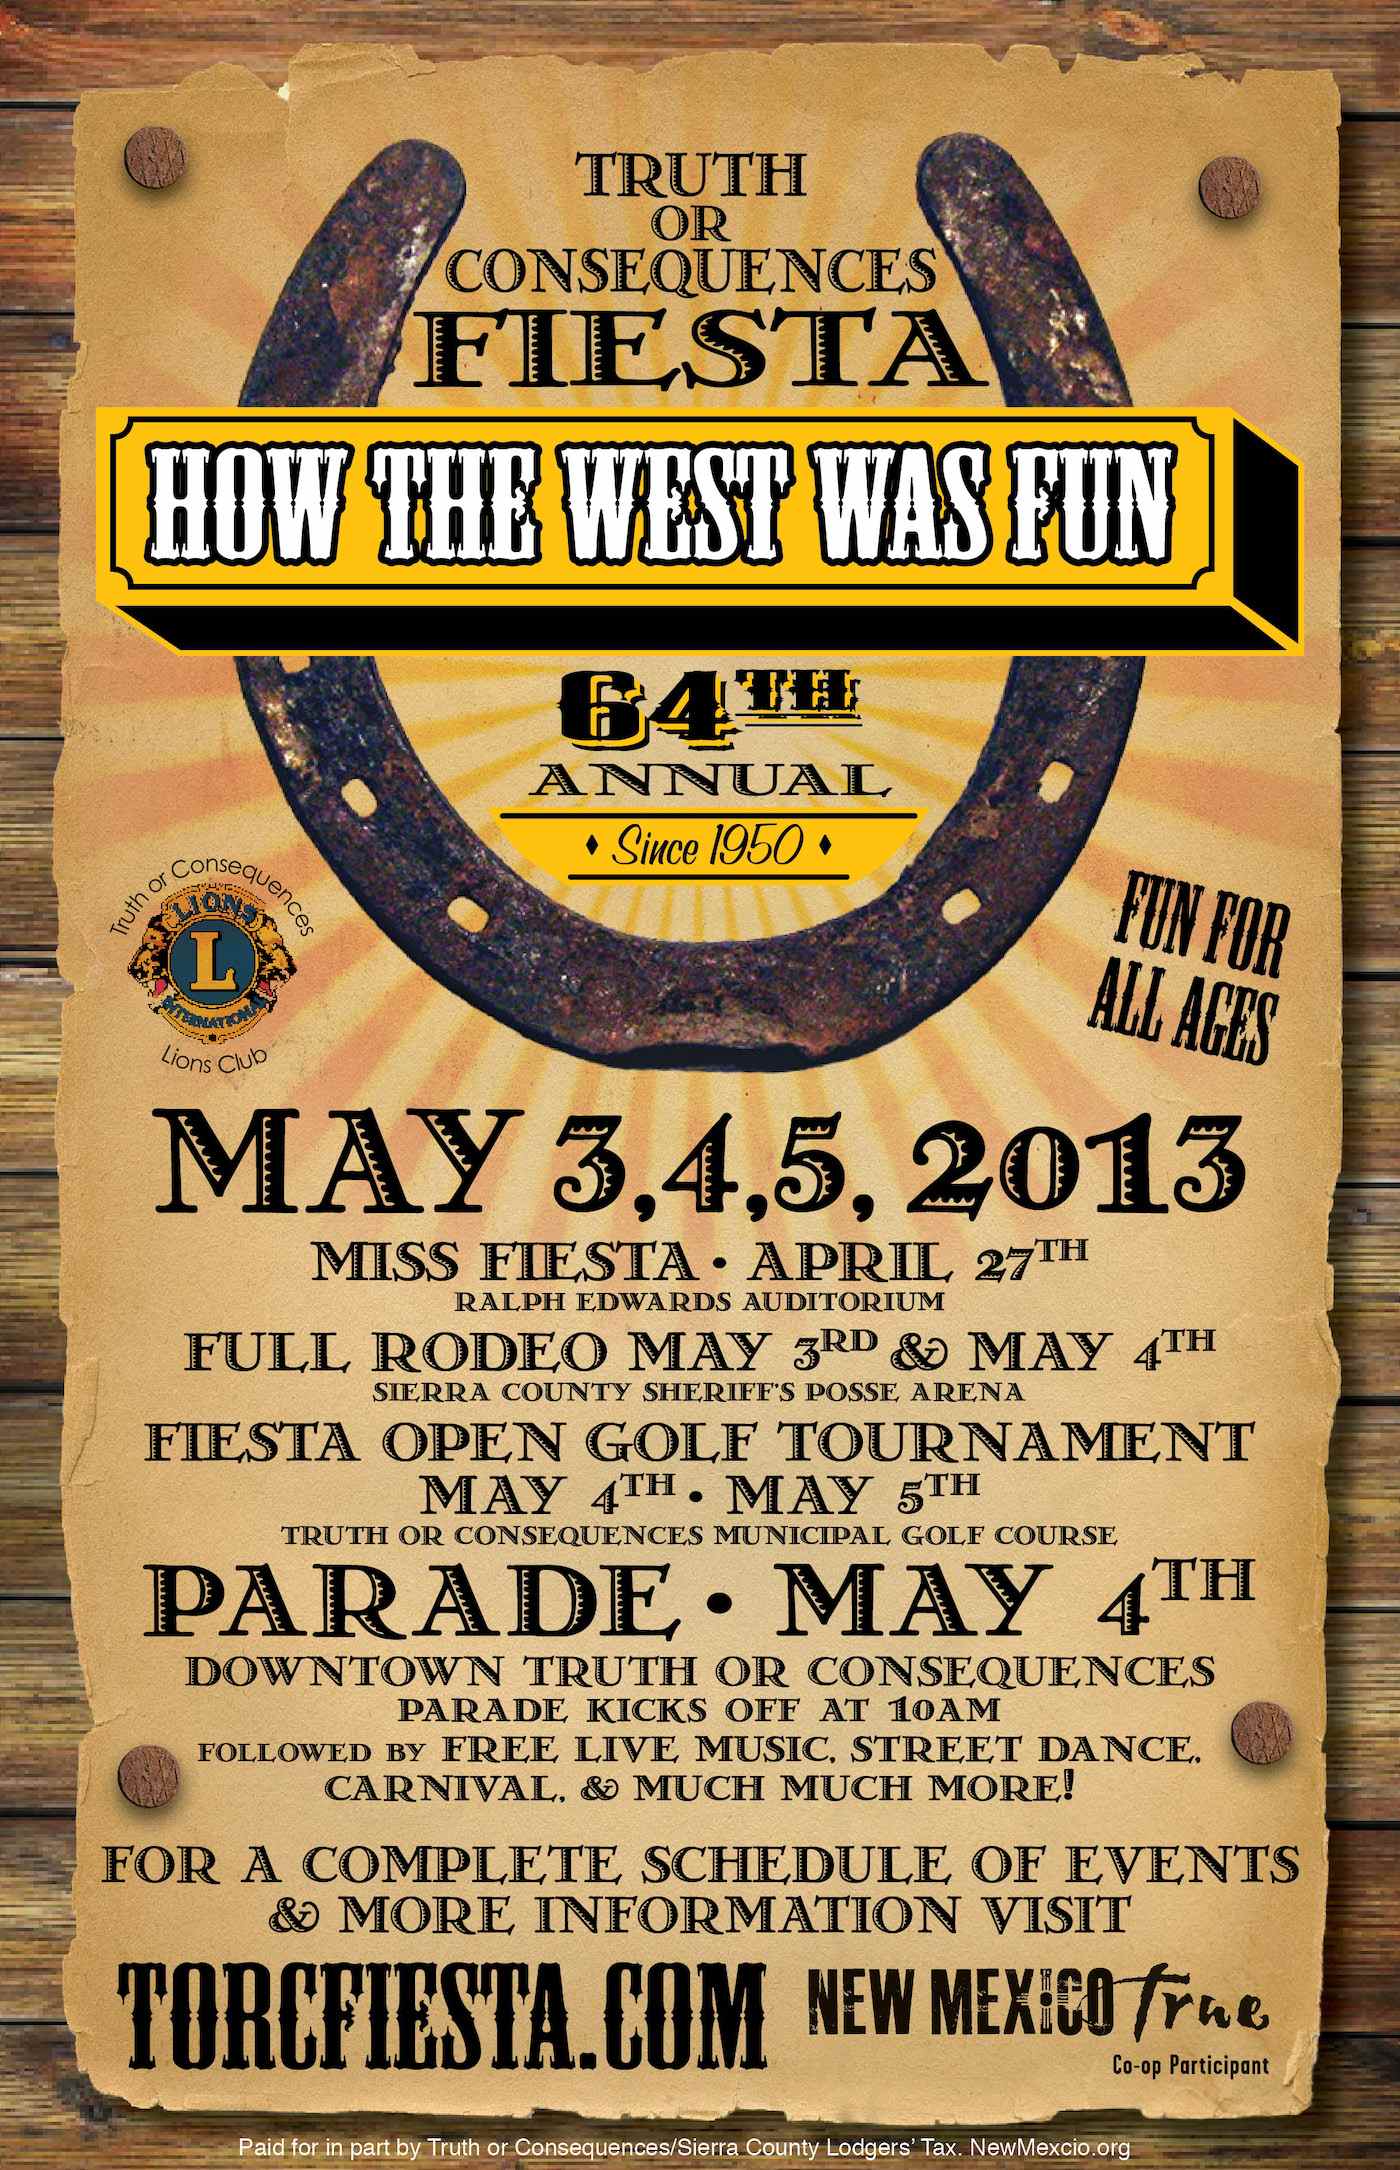 Fiesta 2013: How the West Was Fun!